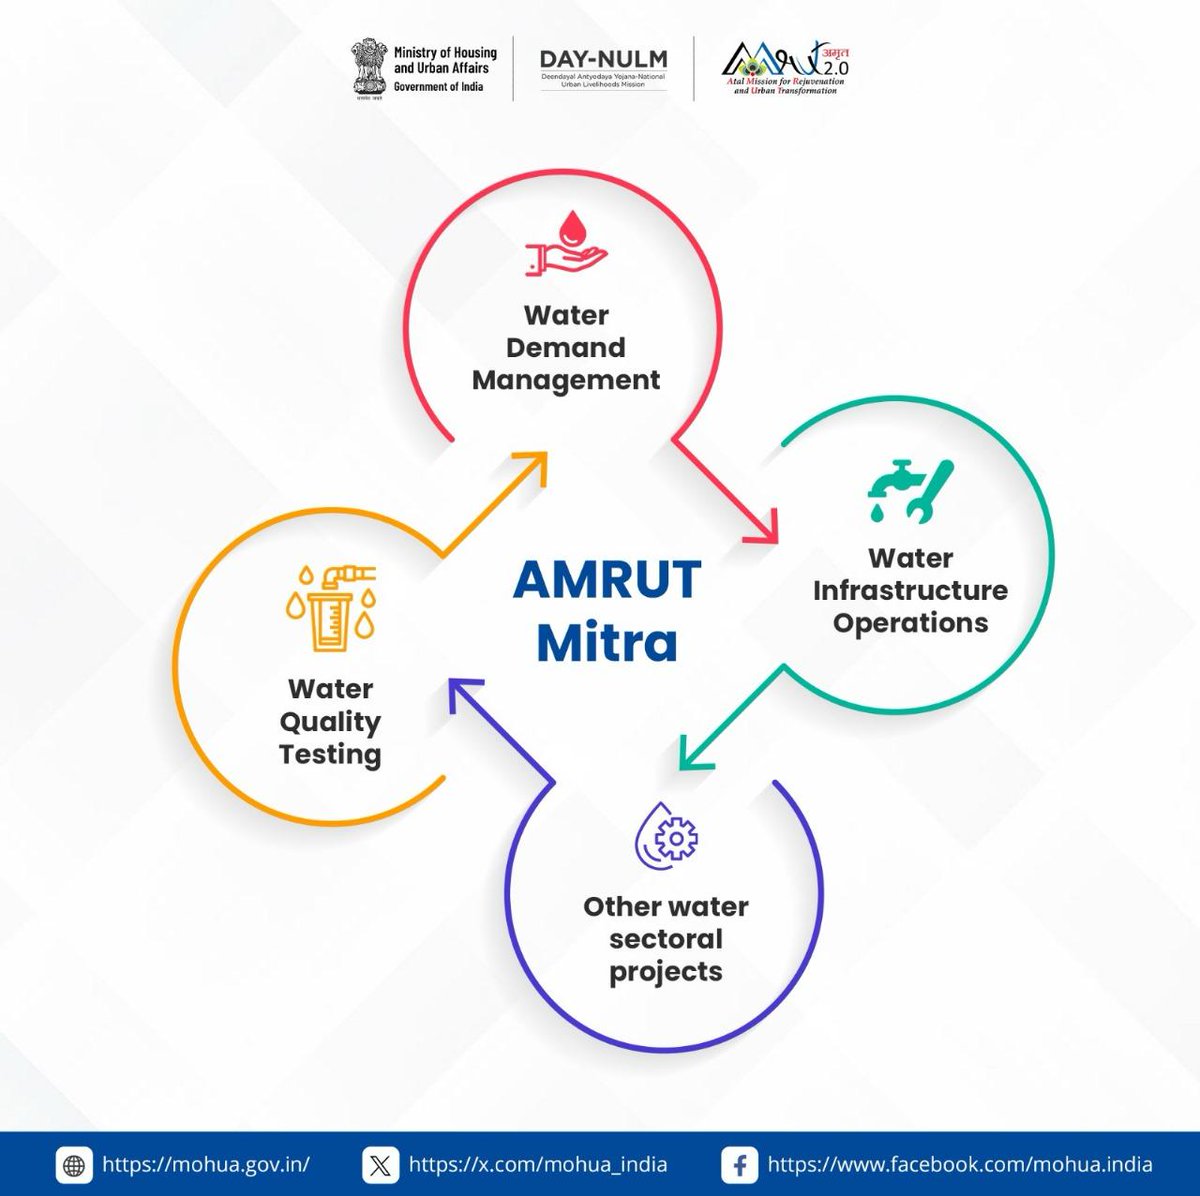 #AMRUTMitra will strive to engage women Self-Help Groups (#SHGs) in urban water management, recognising them as vital contributors to household water management. 

#PeyJalSurvekshanAwards #AMRUT #PeyJal